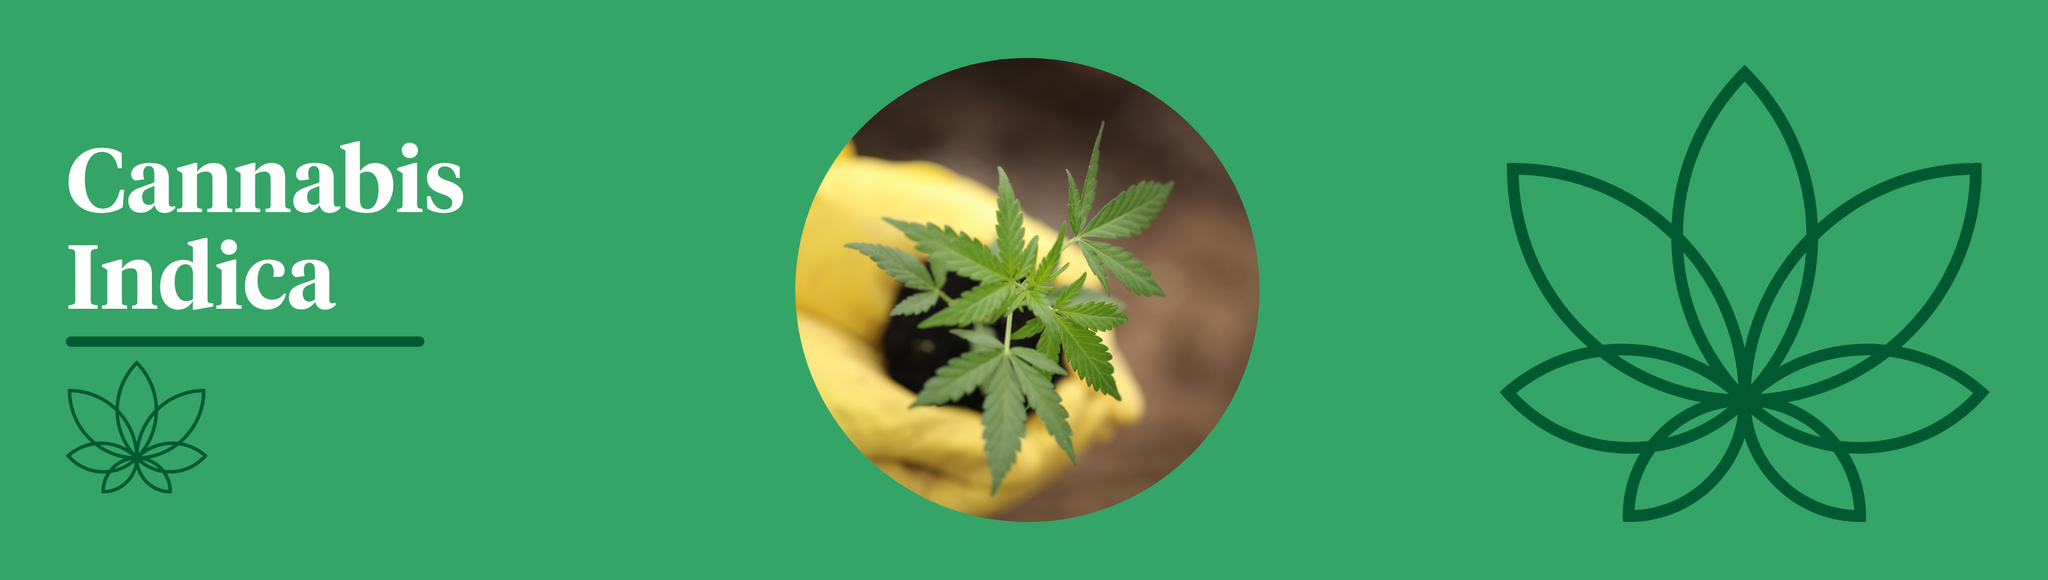 A green background with the Supreme CBD logo to the right with an image in the centre of a person wearing yellow gloves lifting a small Cannabis Indica plant out of the ground. Showing the difference between indica and sativa.